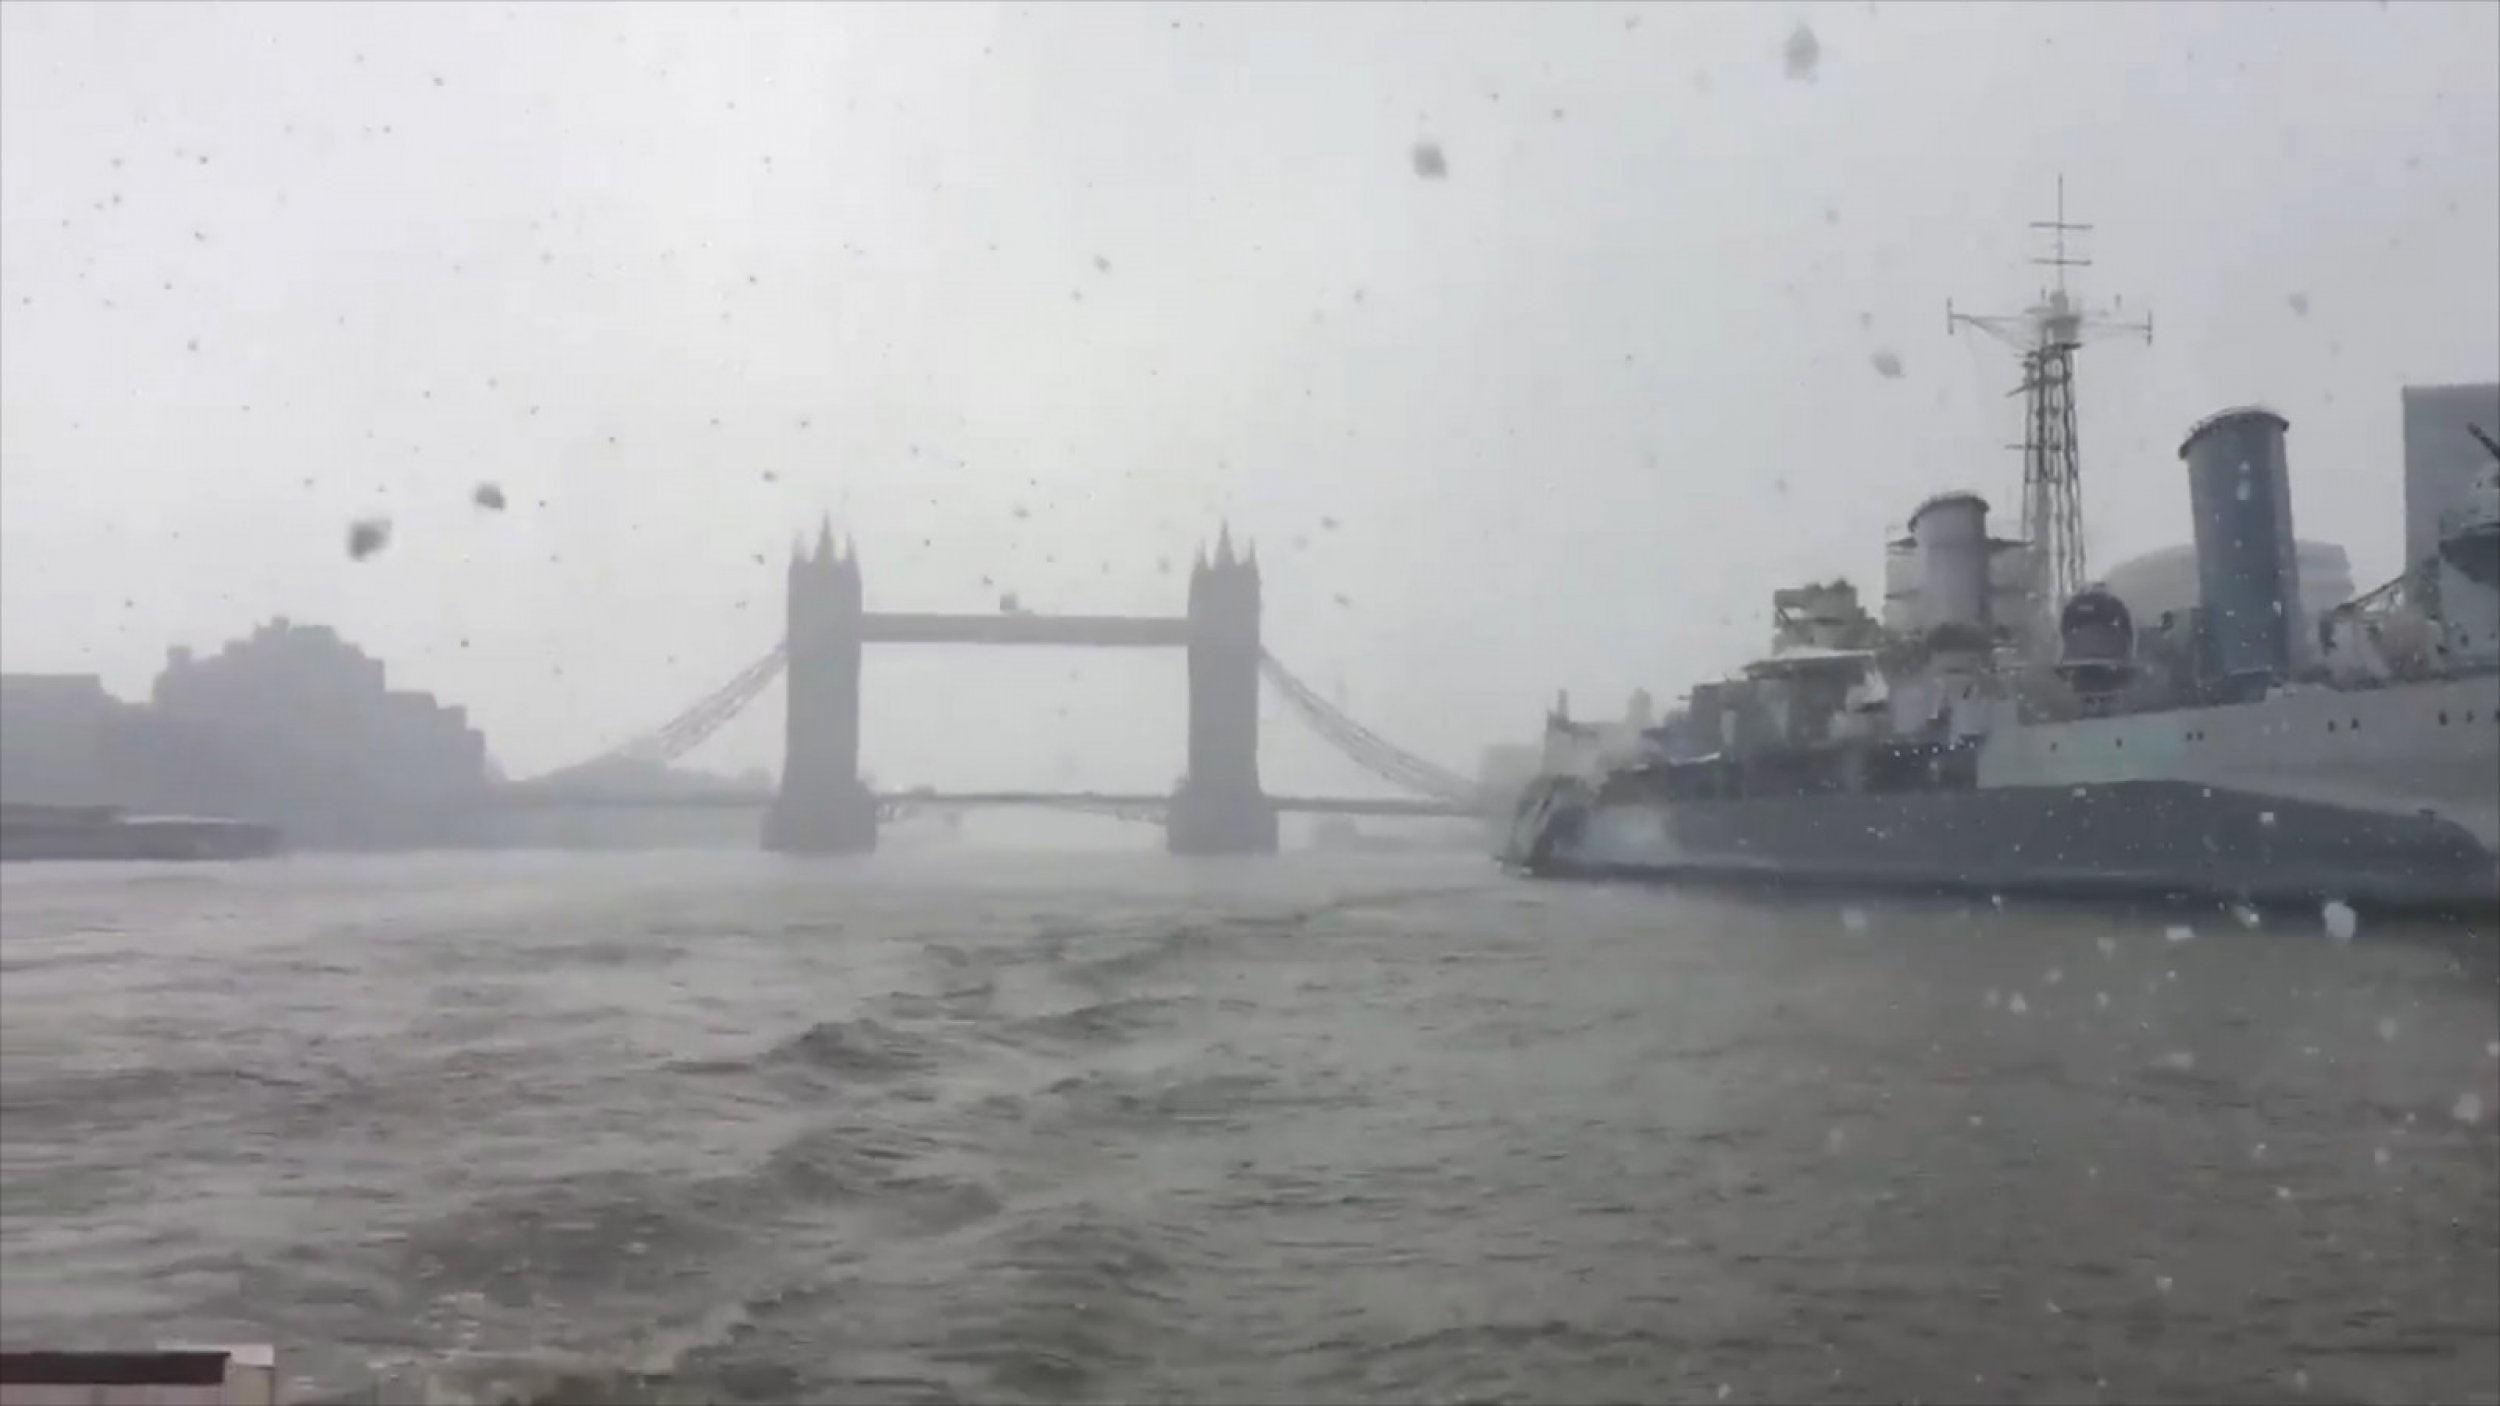 Londoners Freak Out Over Snow As Beast From The East Storm Hits